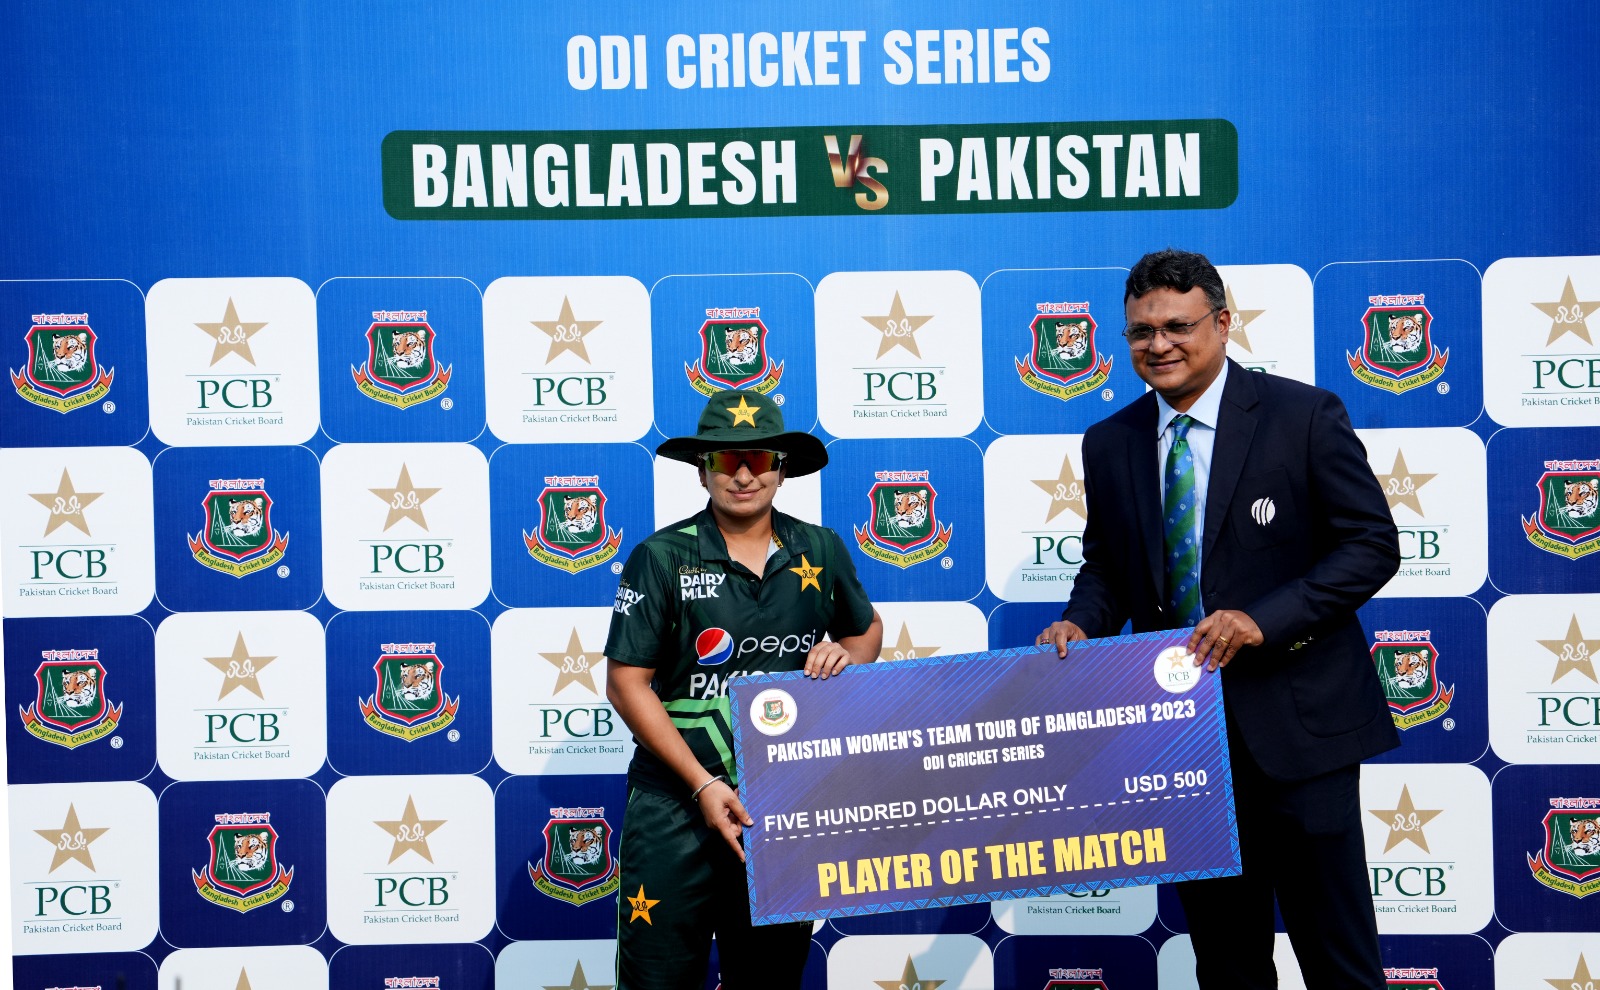 "Sadia's Record-Breaking Performance and Nida's All-Round Brilliance Secure Victory for Pakistan over Bangladesh"